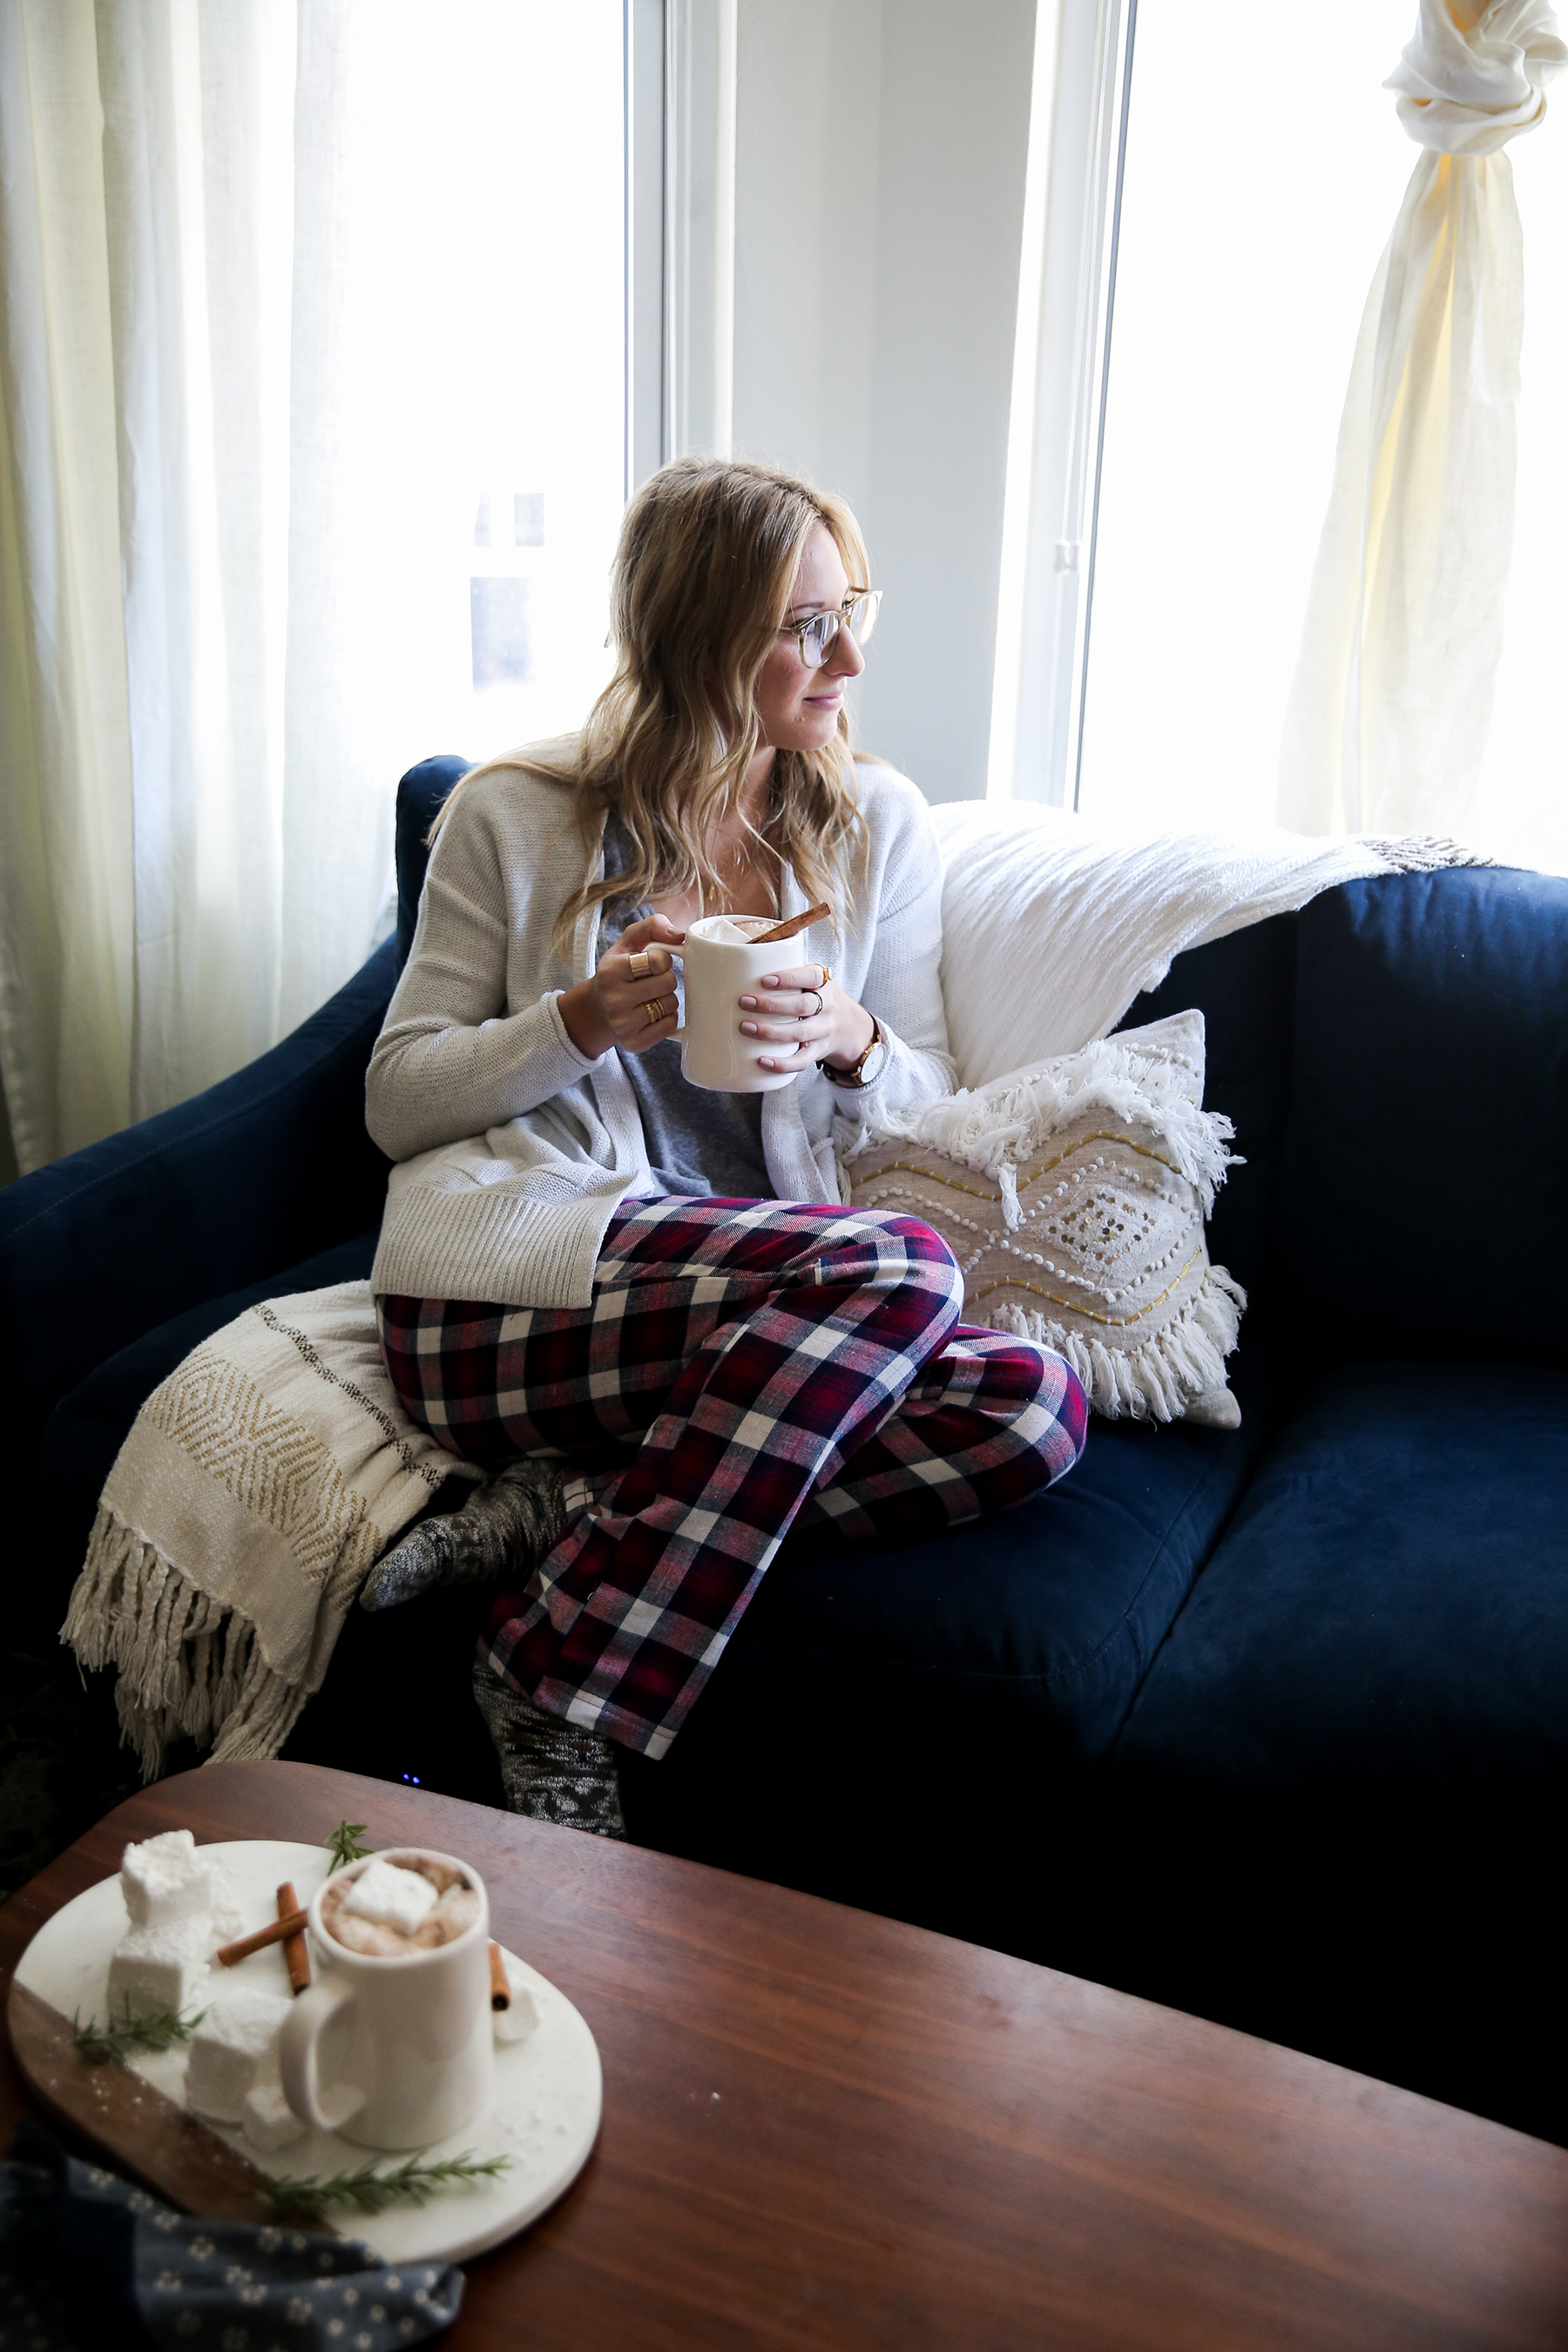 cozy holiday shoot, hot cocoa, plaid, cozy outfit, cute glasses, nude nails, hot chocolate with marshmallows, homemade marshmallows, photos by Andrea Posadas of Amanda Holstein for Advicefroma20Something.com